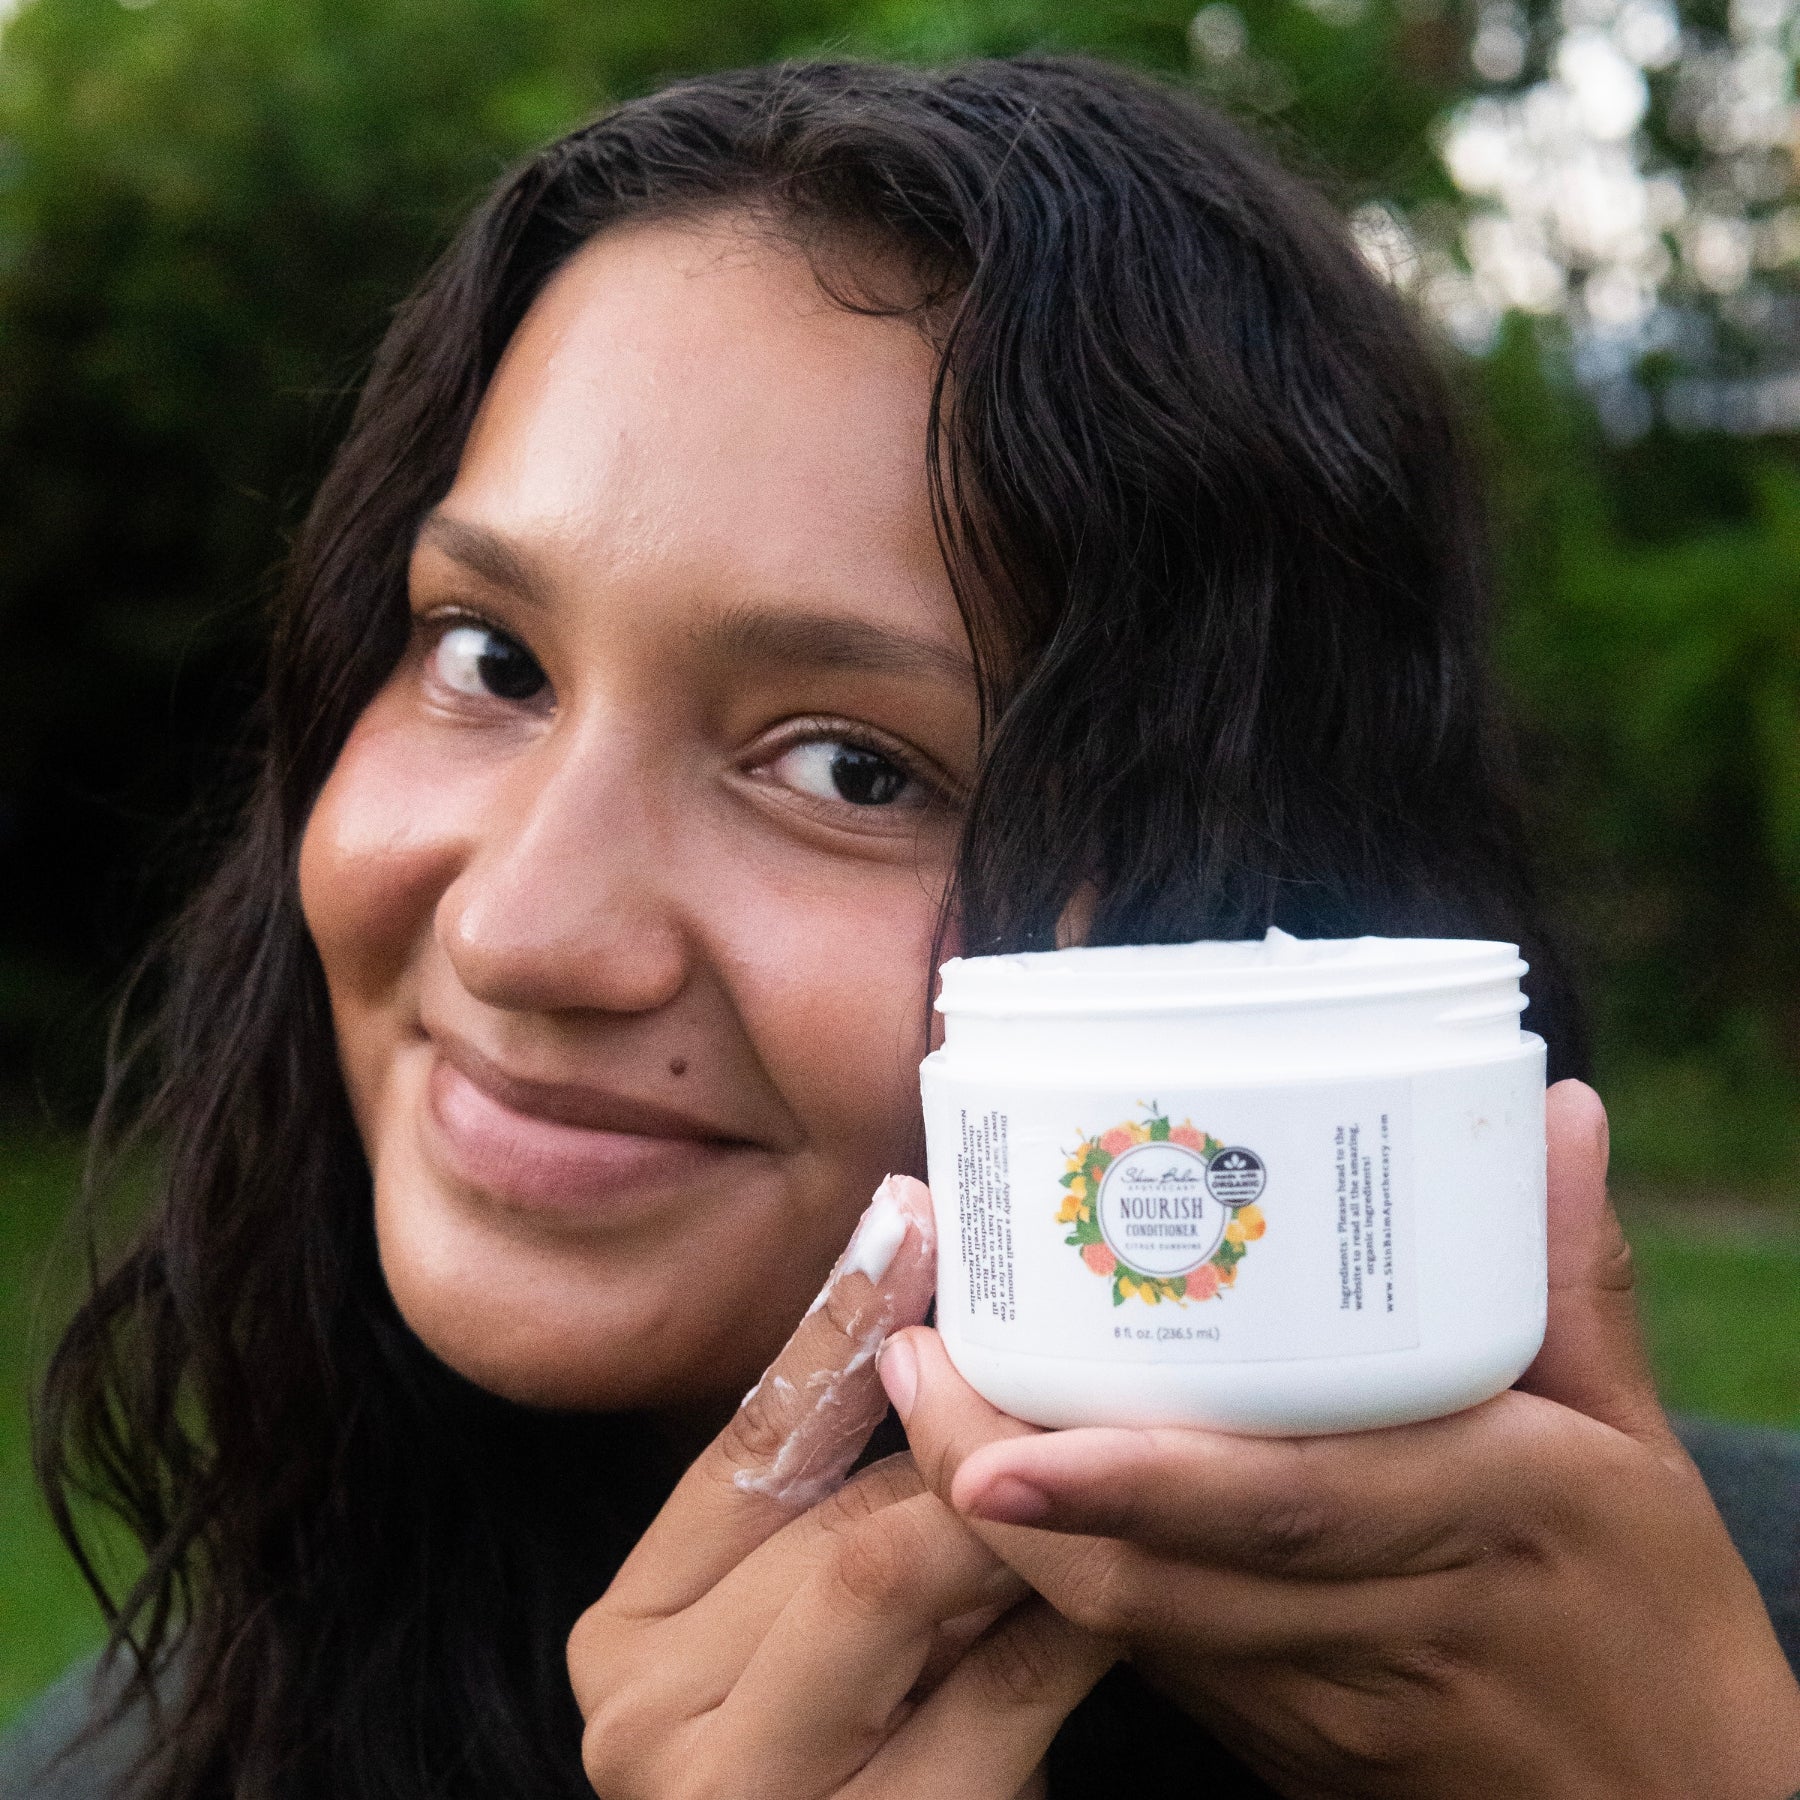  A close-up shot of a smiling woman holding a container of Citrus Sunshine Nourish Conditioner.